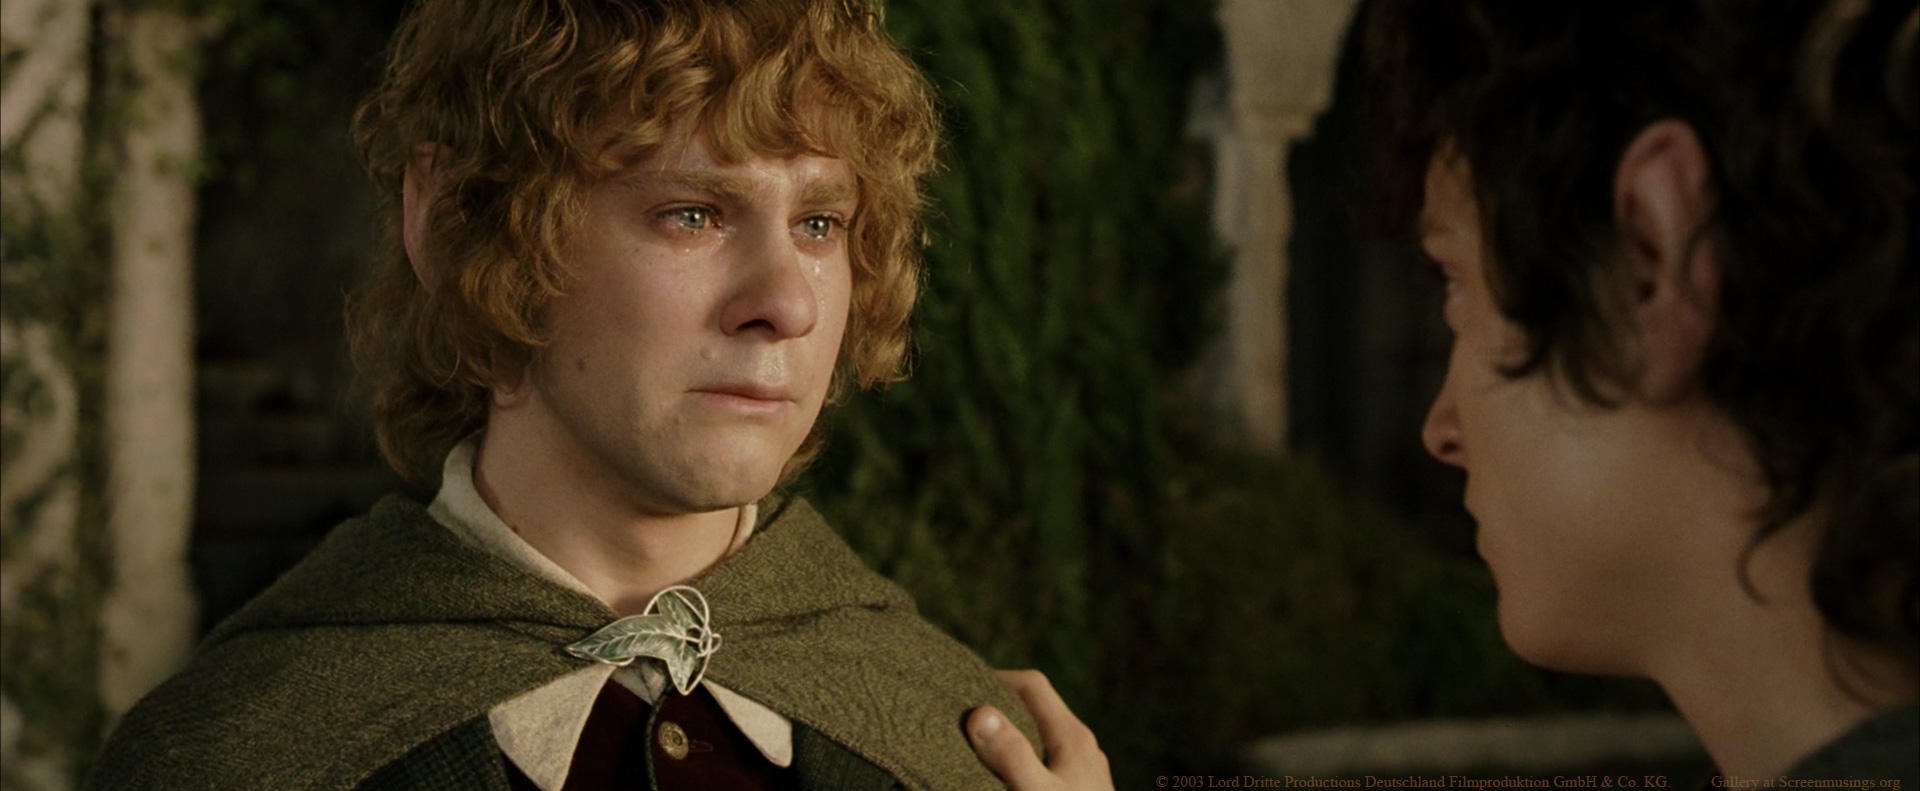 Dominic Monaghan in The Lord of the Rings: The Return of the King